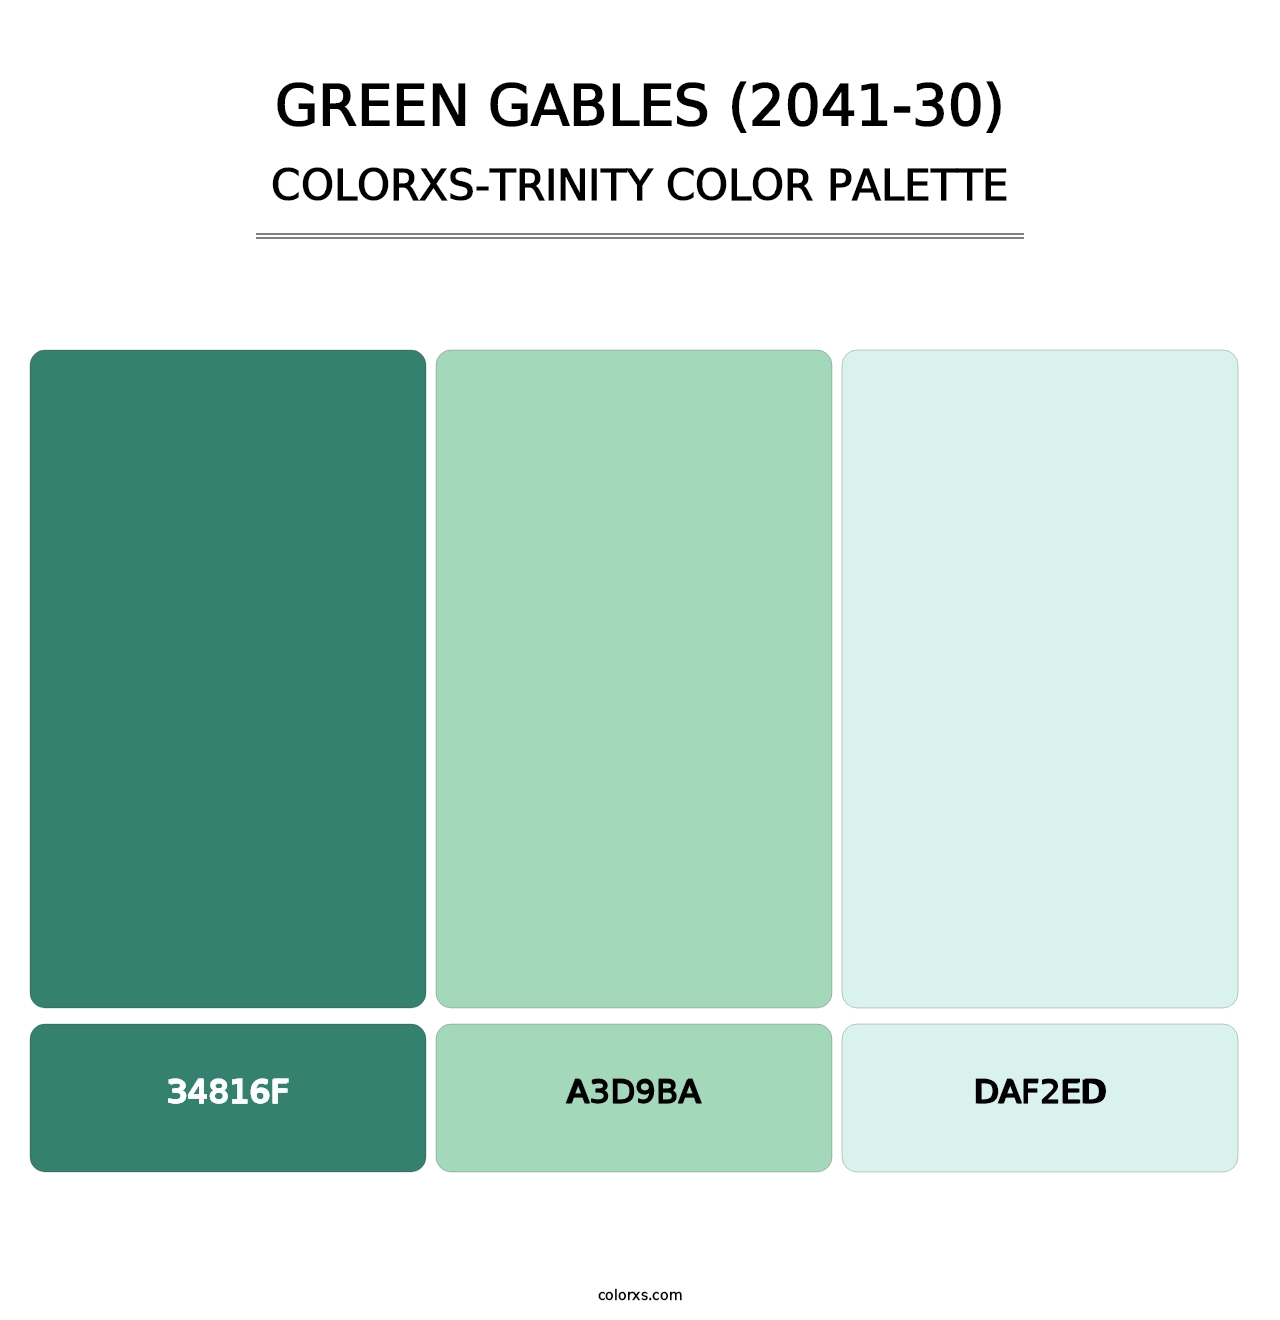 Green Gables (2041-30) - Colorxs Trinity Palette